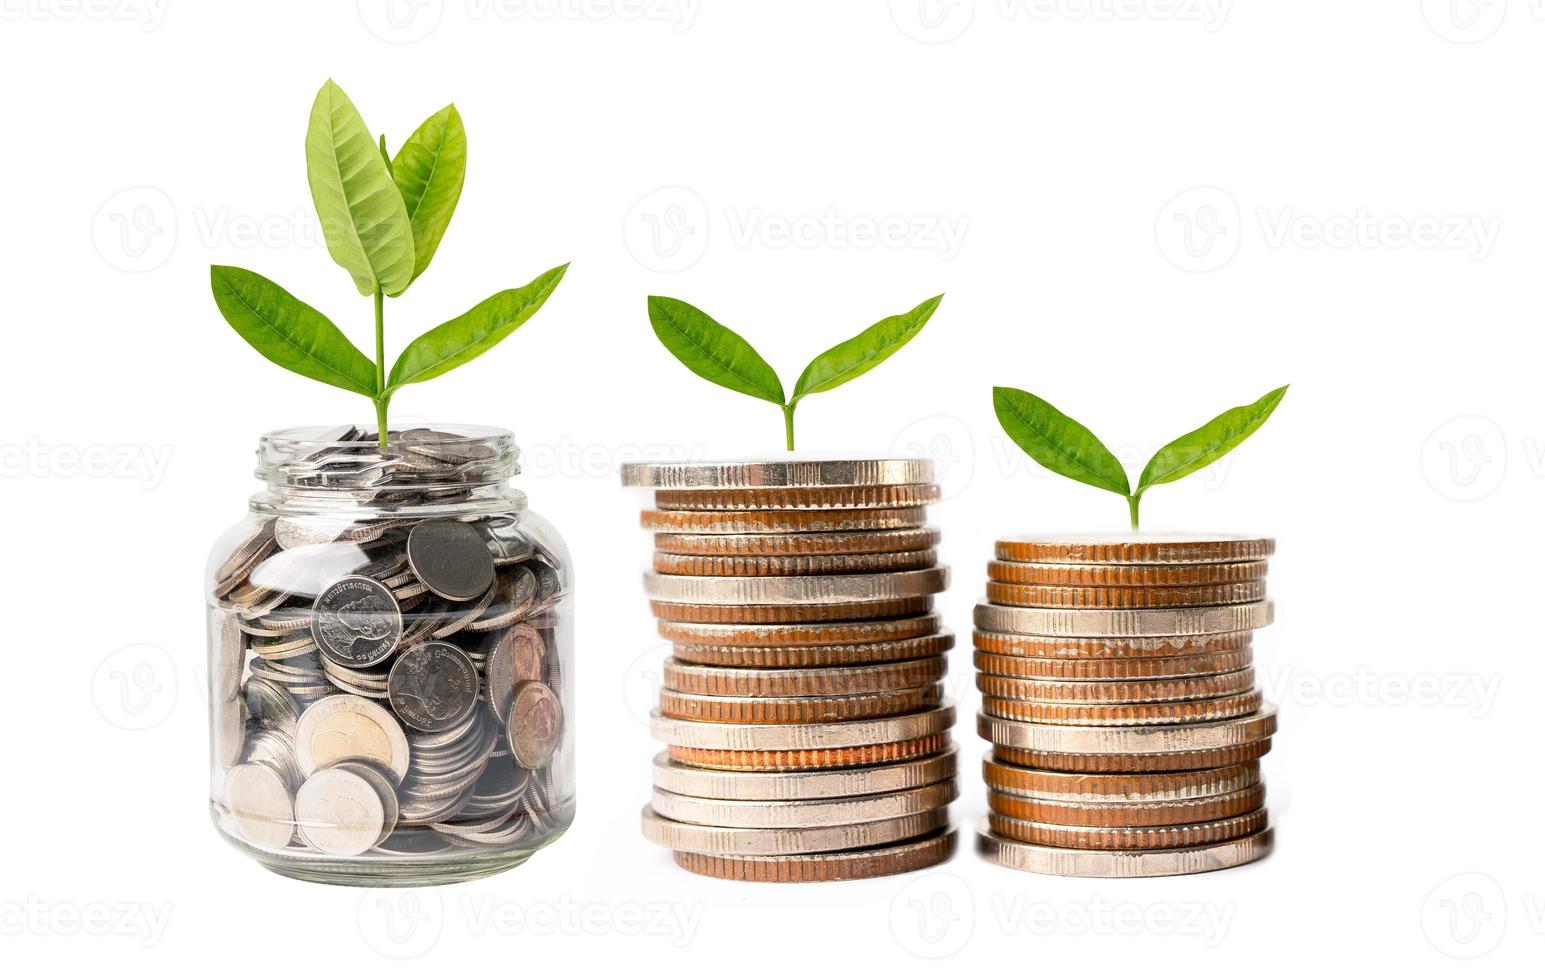 Tree leaf on save money coins, Business finance saving banking investment concept. photo